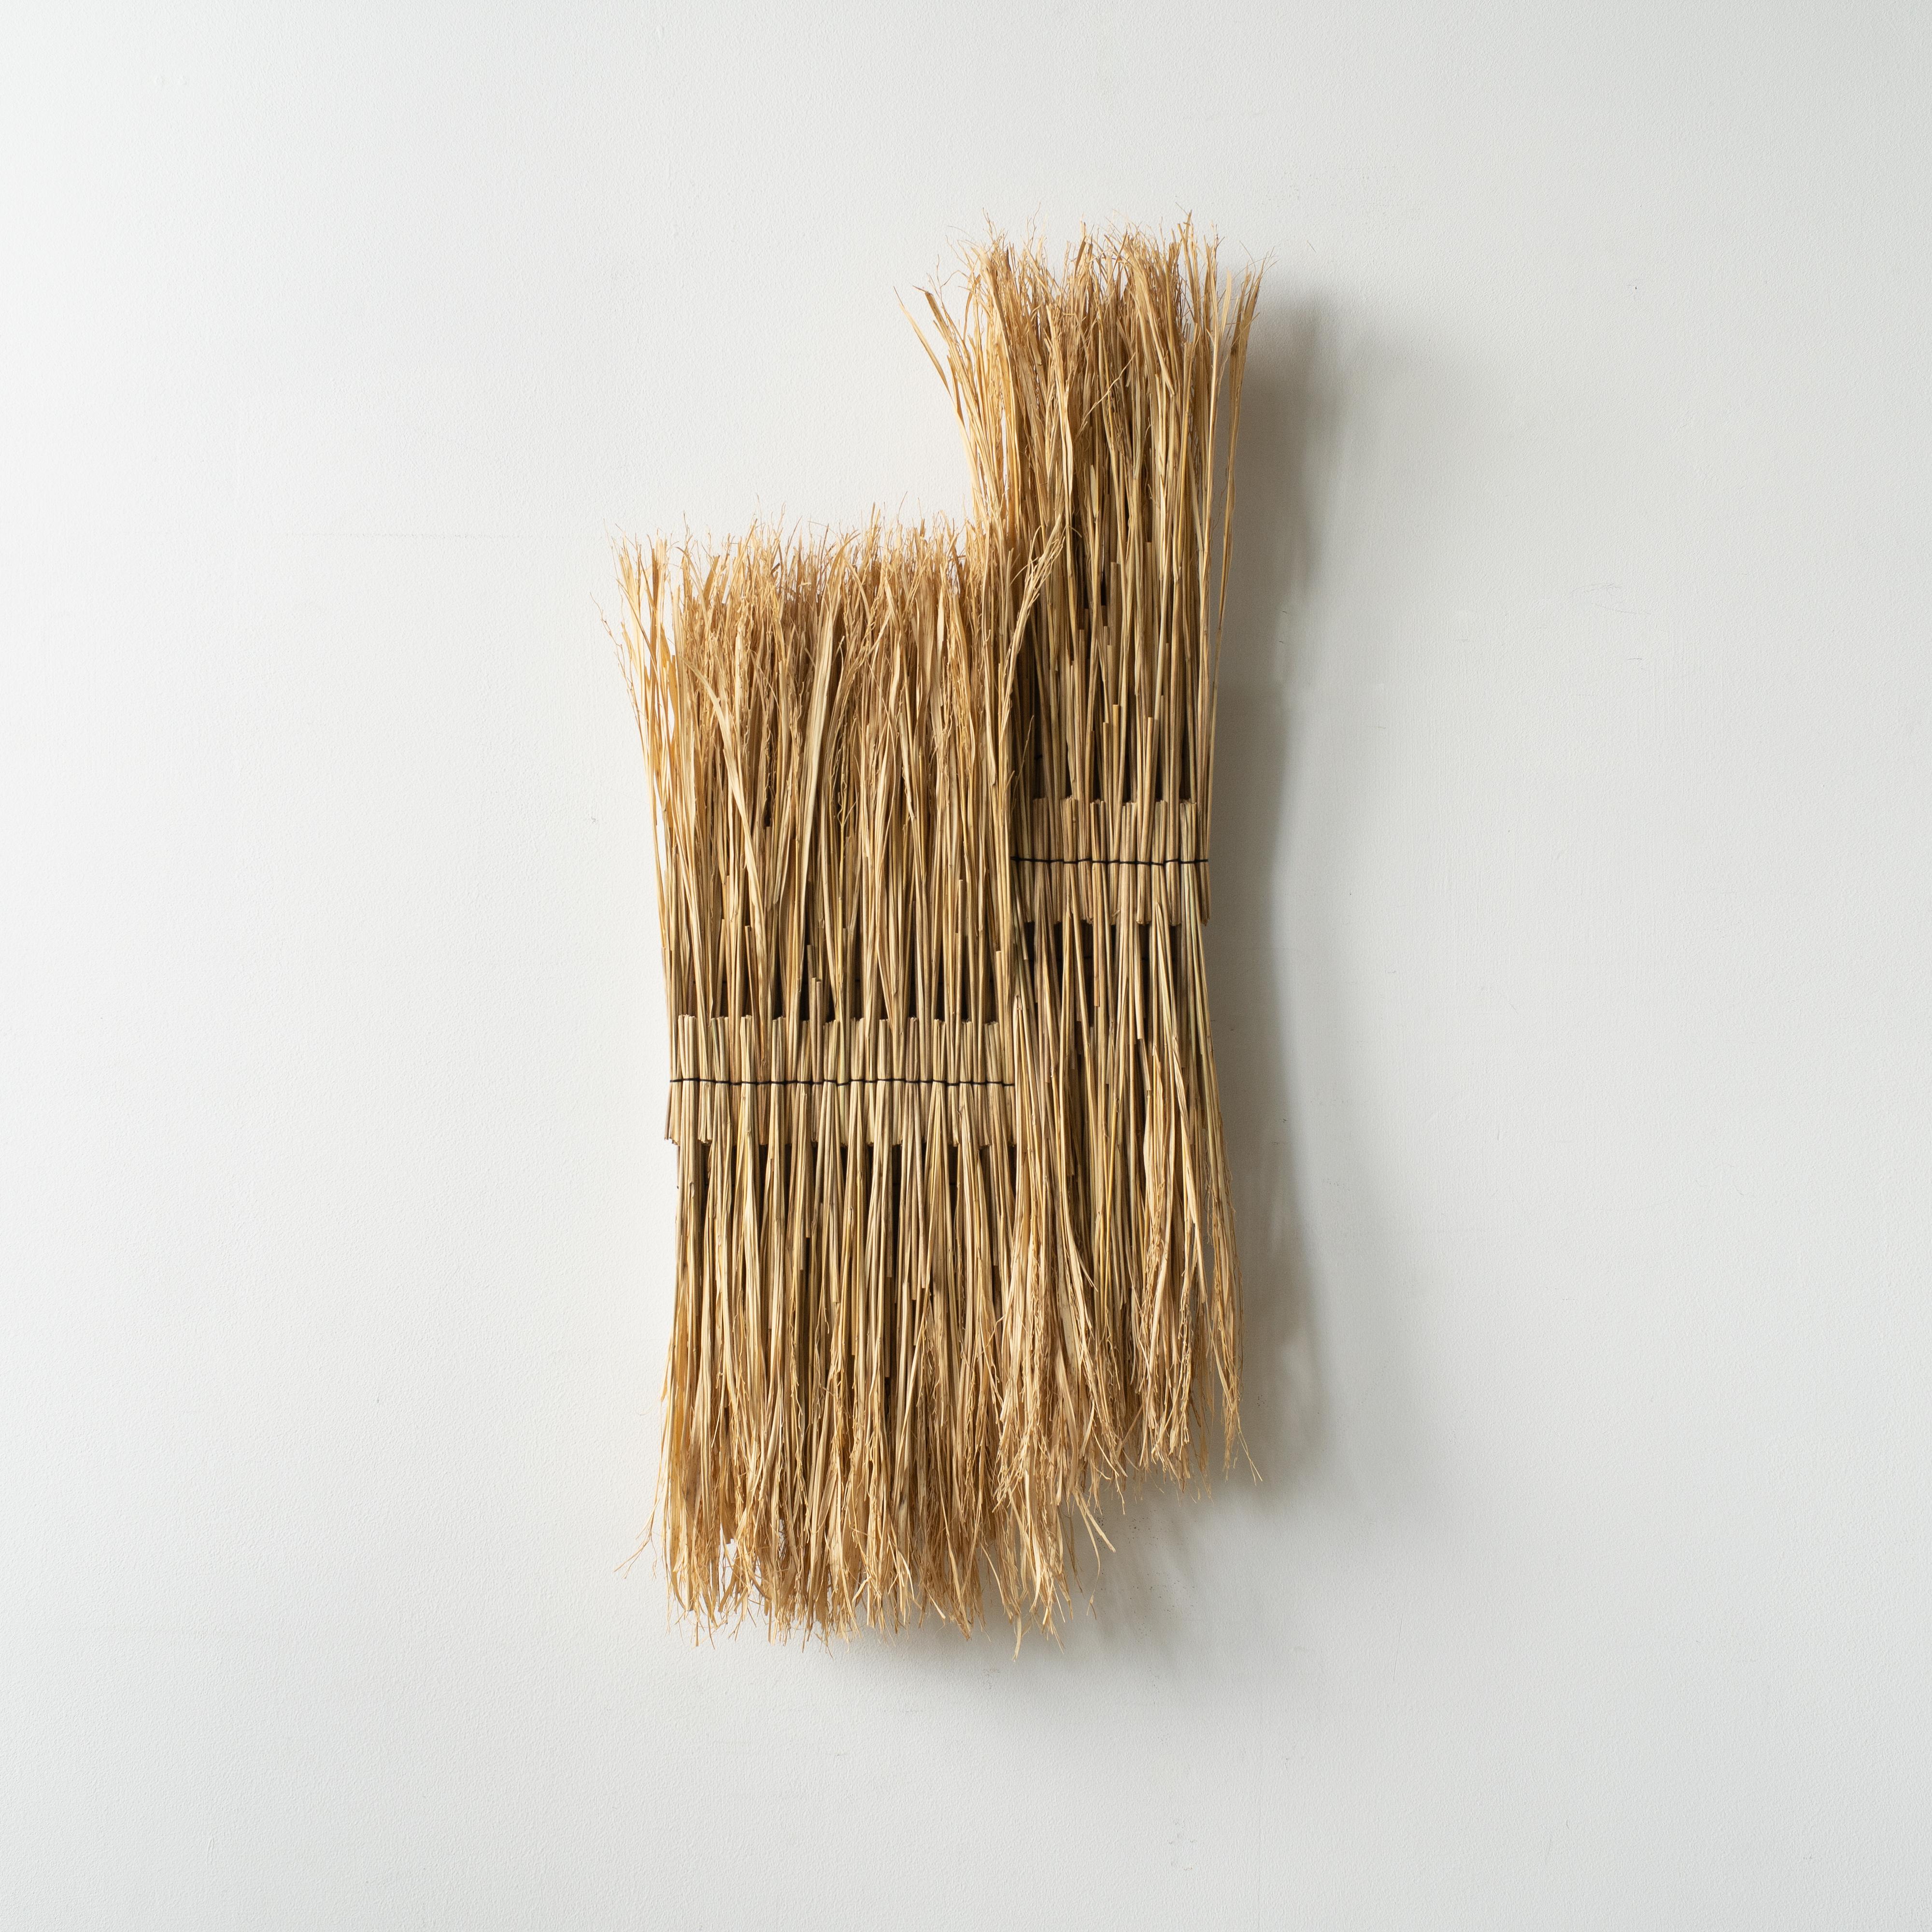 Hand-sewed rice straw art by ARKO. 
Title: Composition Marcato (A)
This is one of the series named 